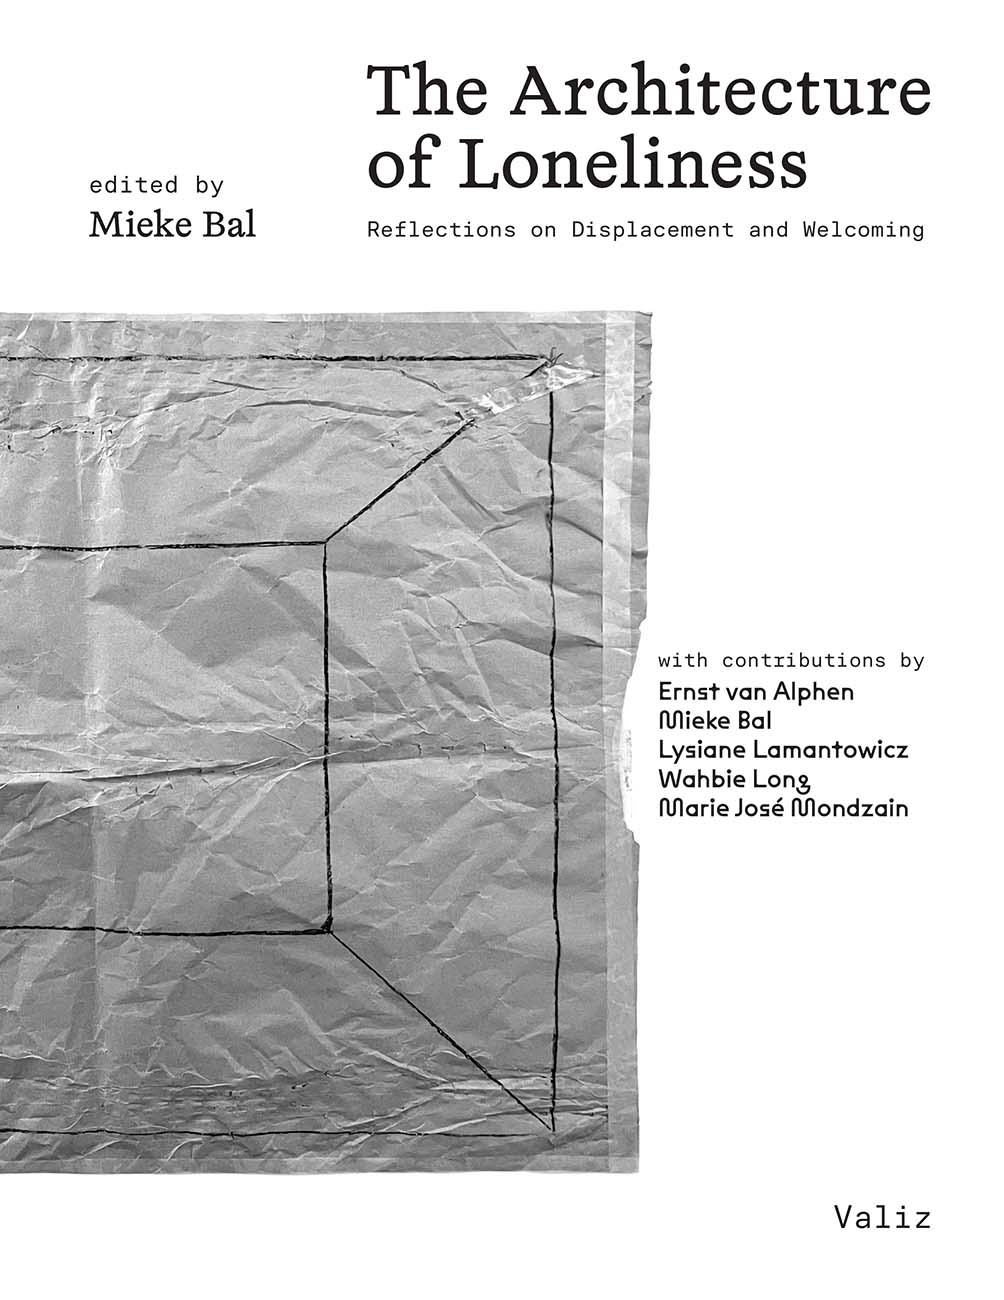 The Architecture of Loneliness – Reflections on Displacement and Welcoming